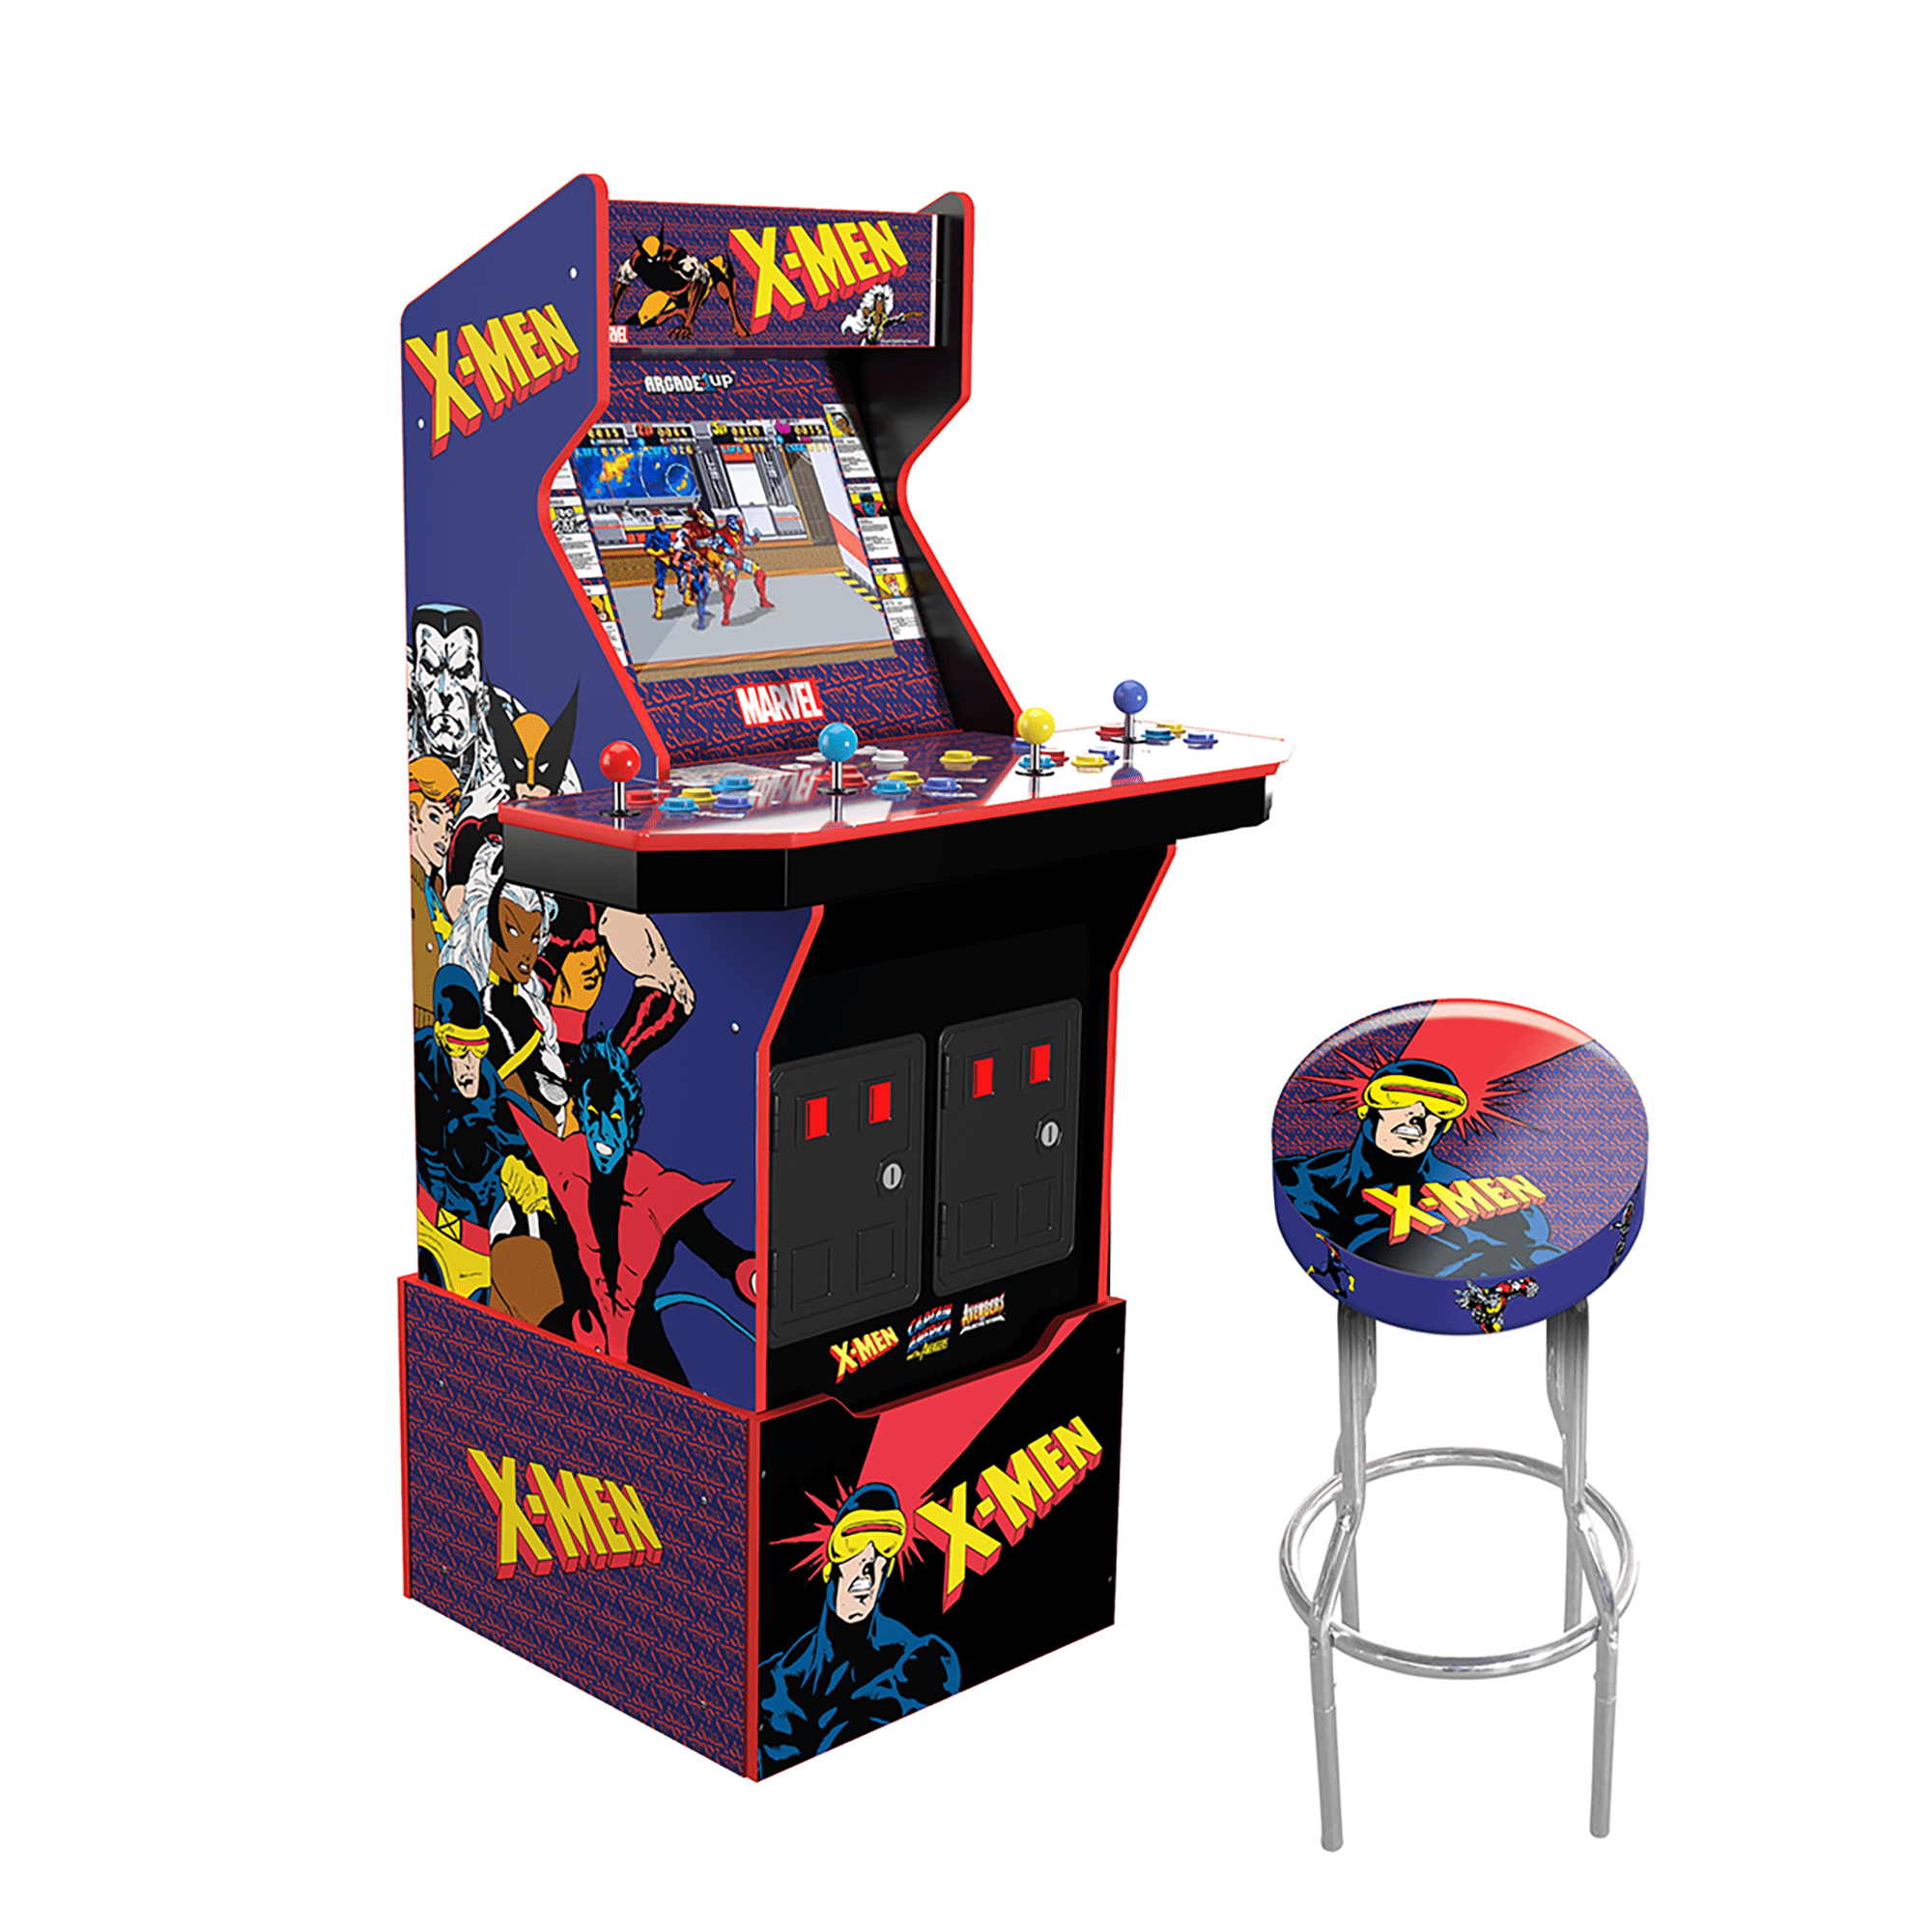 Arcade1up Arcade Cabinet Graphic Decal Complete Kits BattleToads 